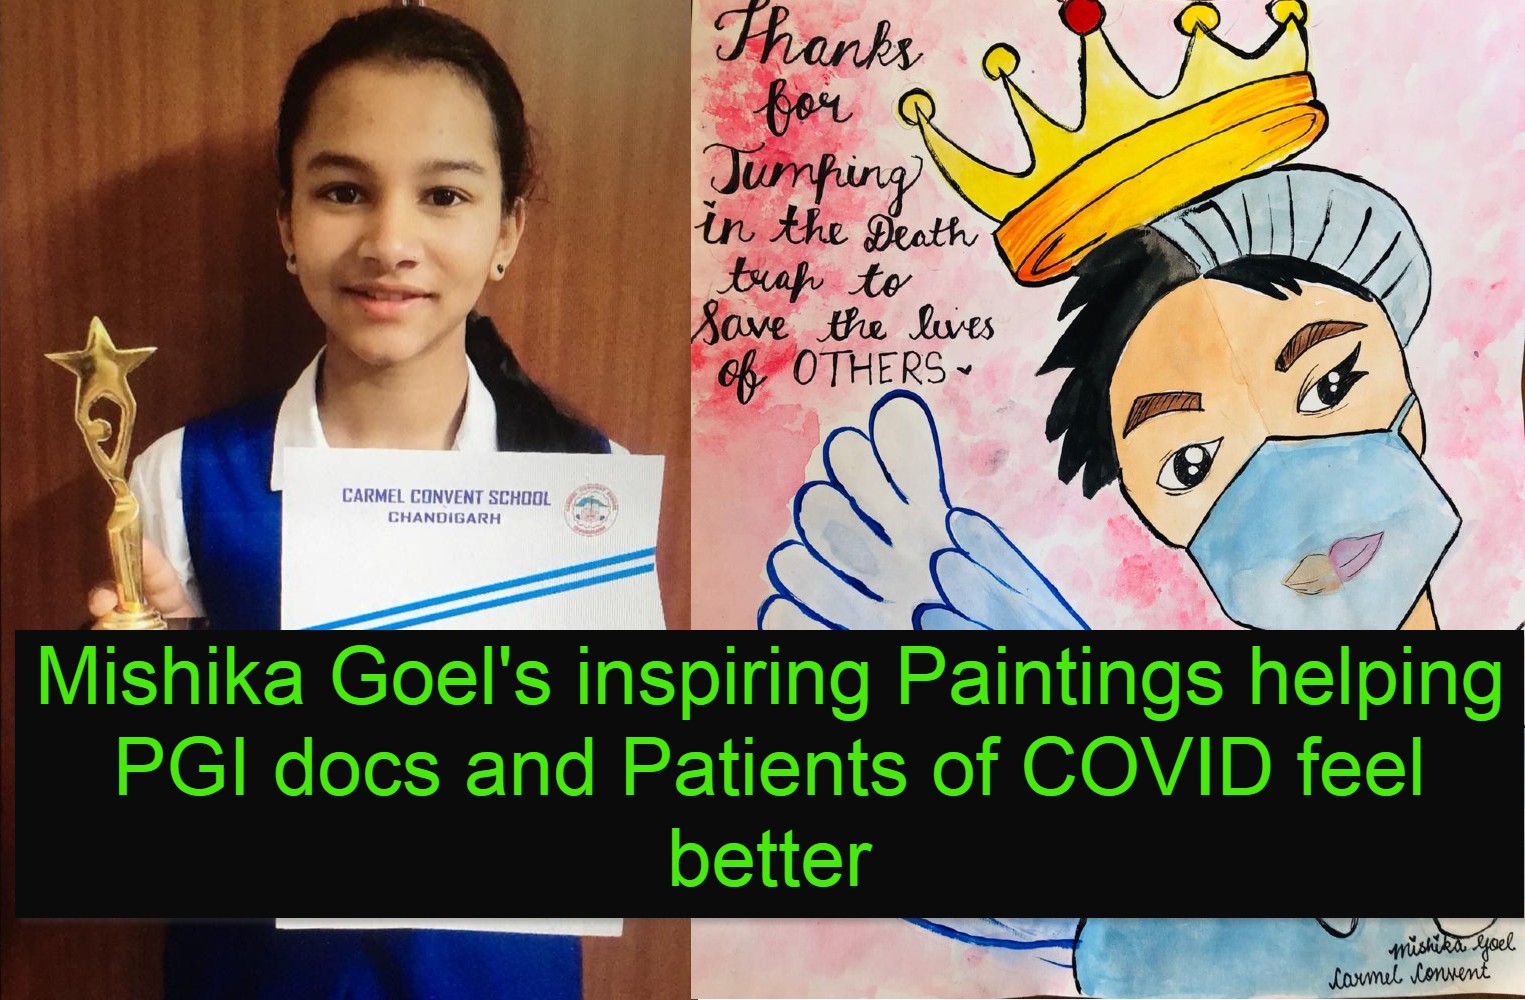 Her Paintings are providing solace to #COVID Patients in PGIMER